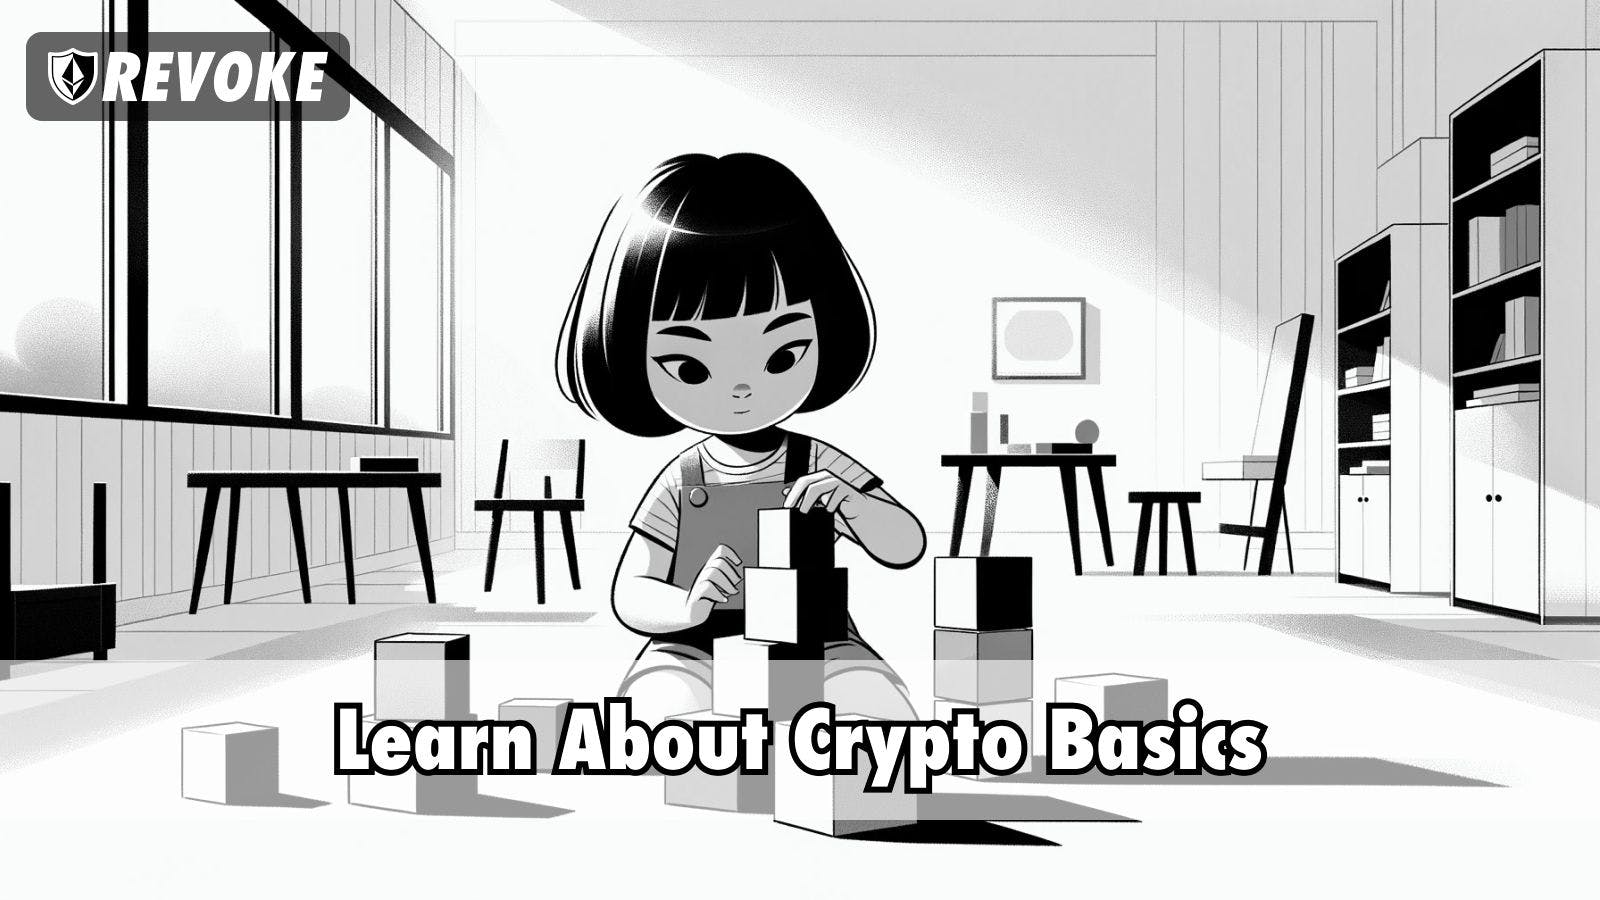 Learn About Crypto Basics